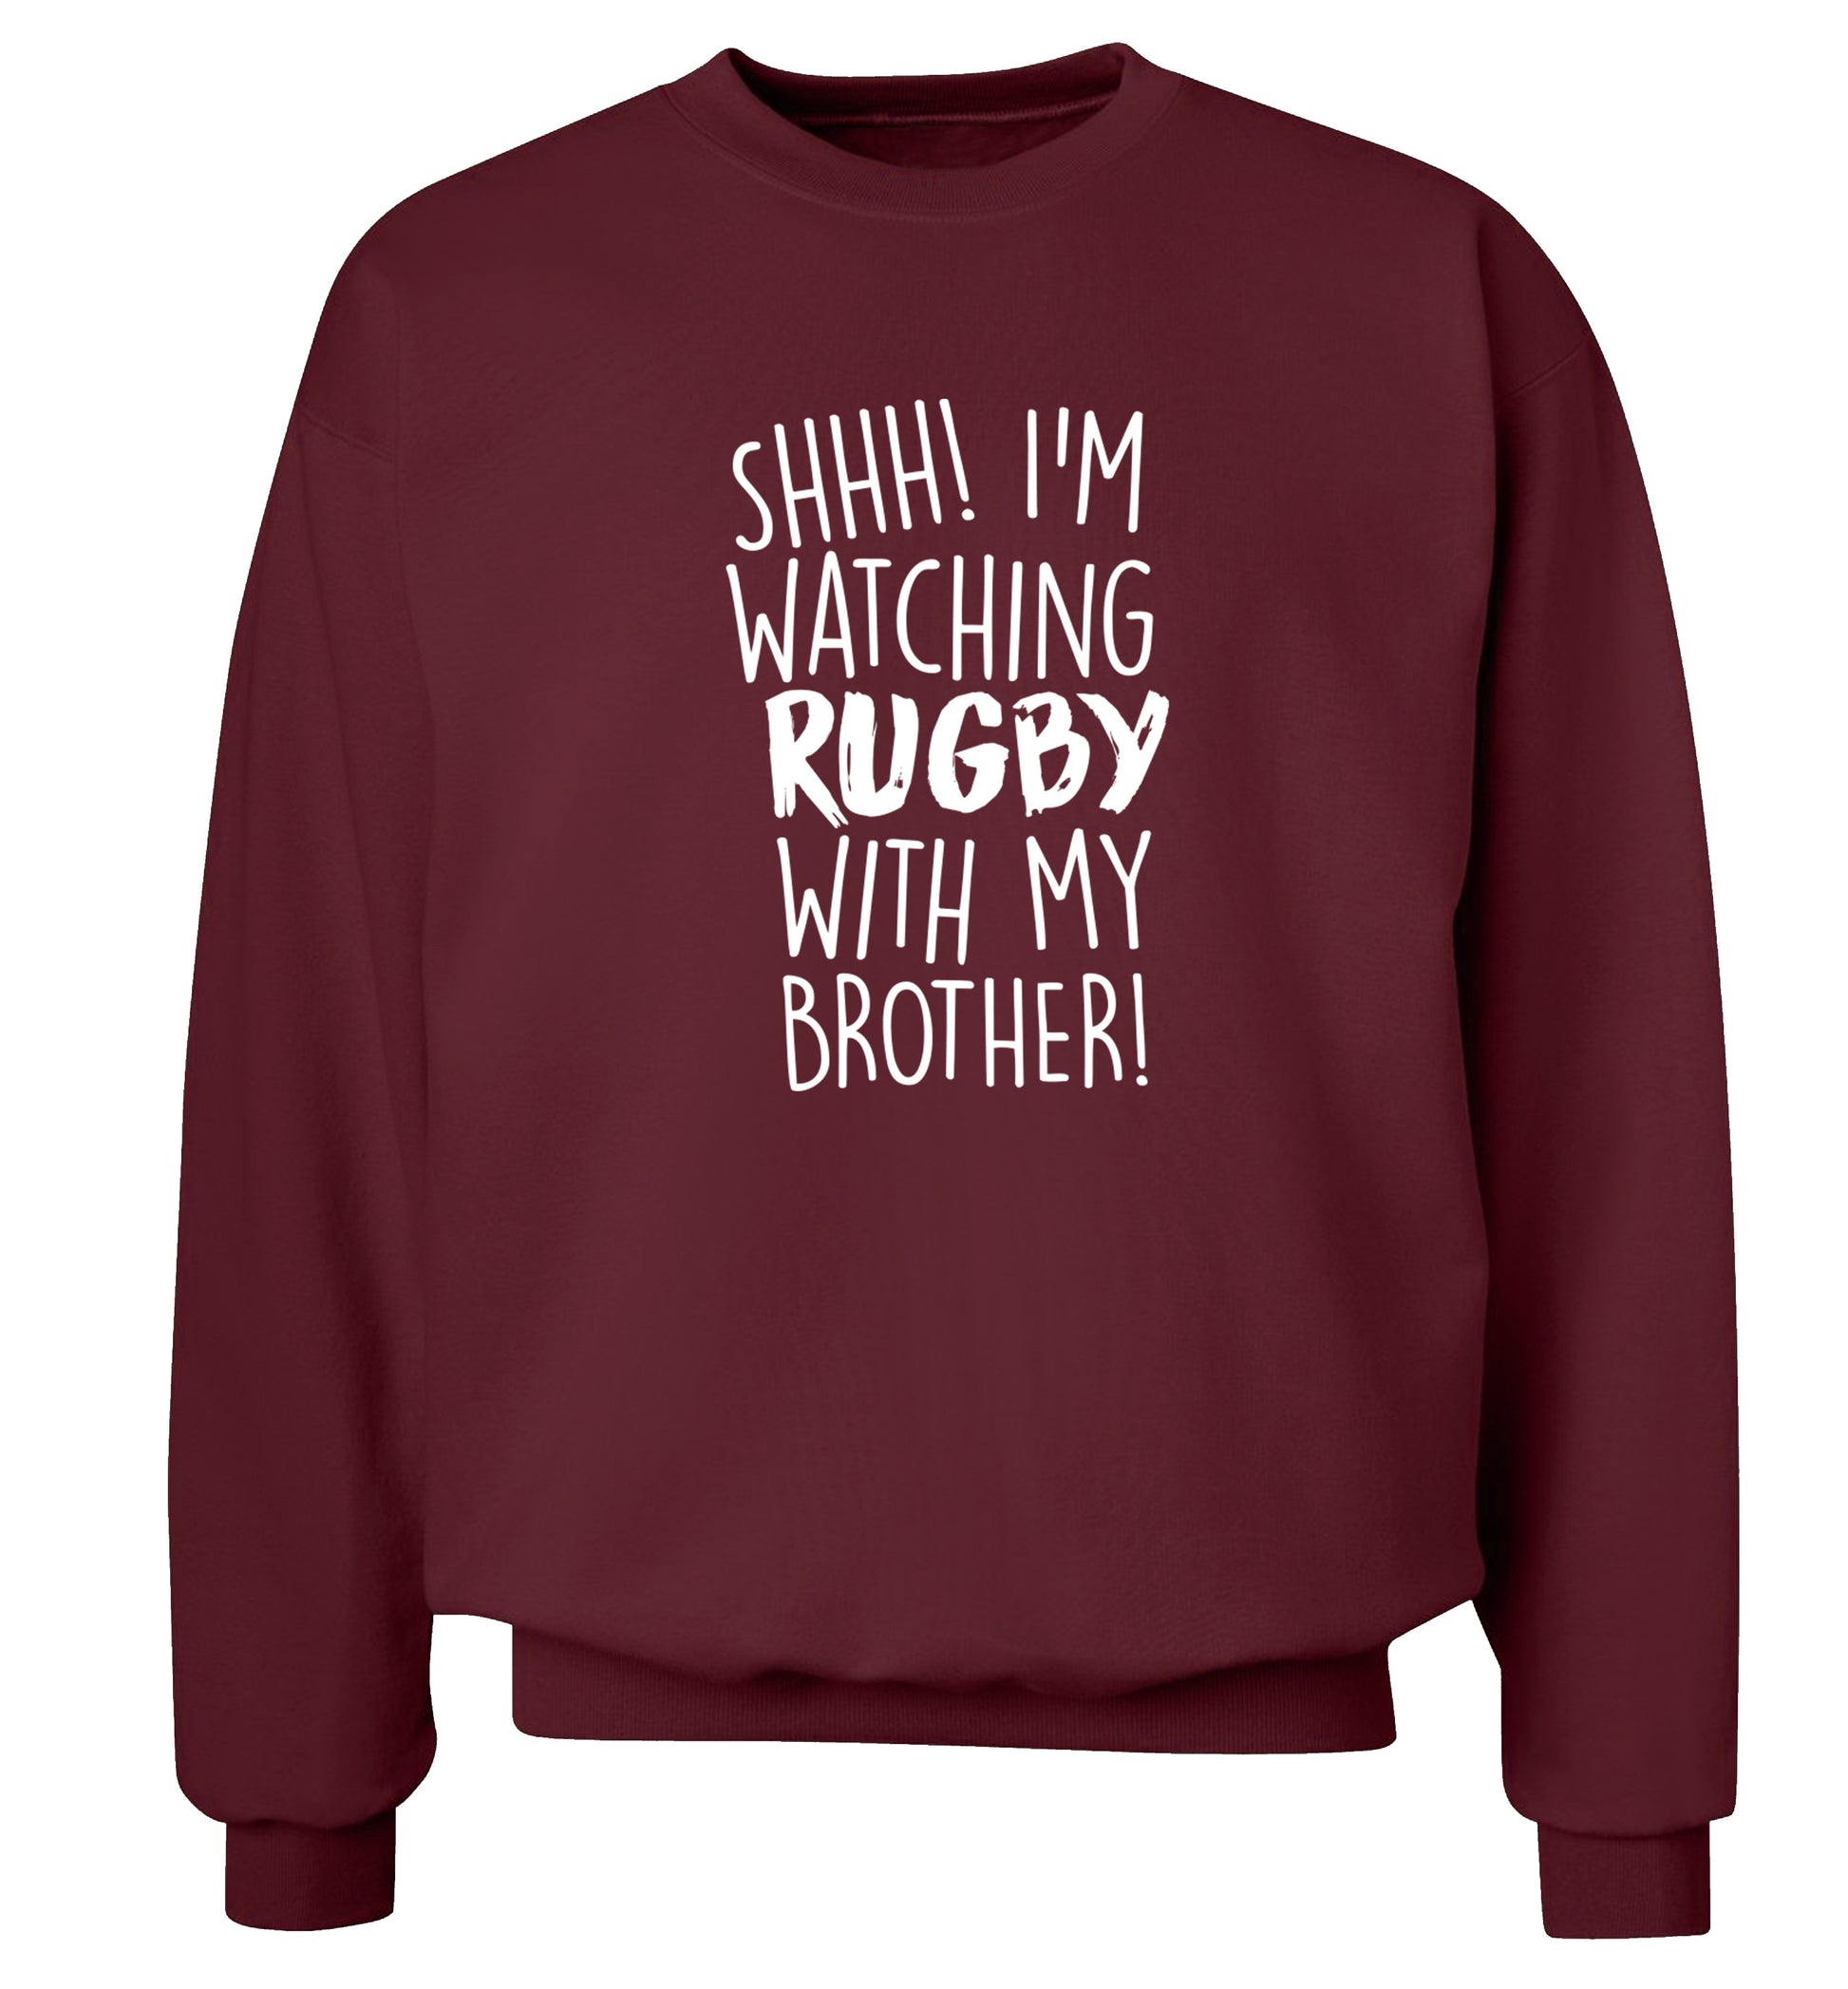 Shh... I'm watching rugby with my brother Adult's unisex maroon Sweater 2XL